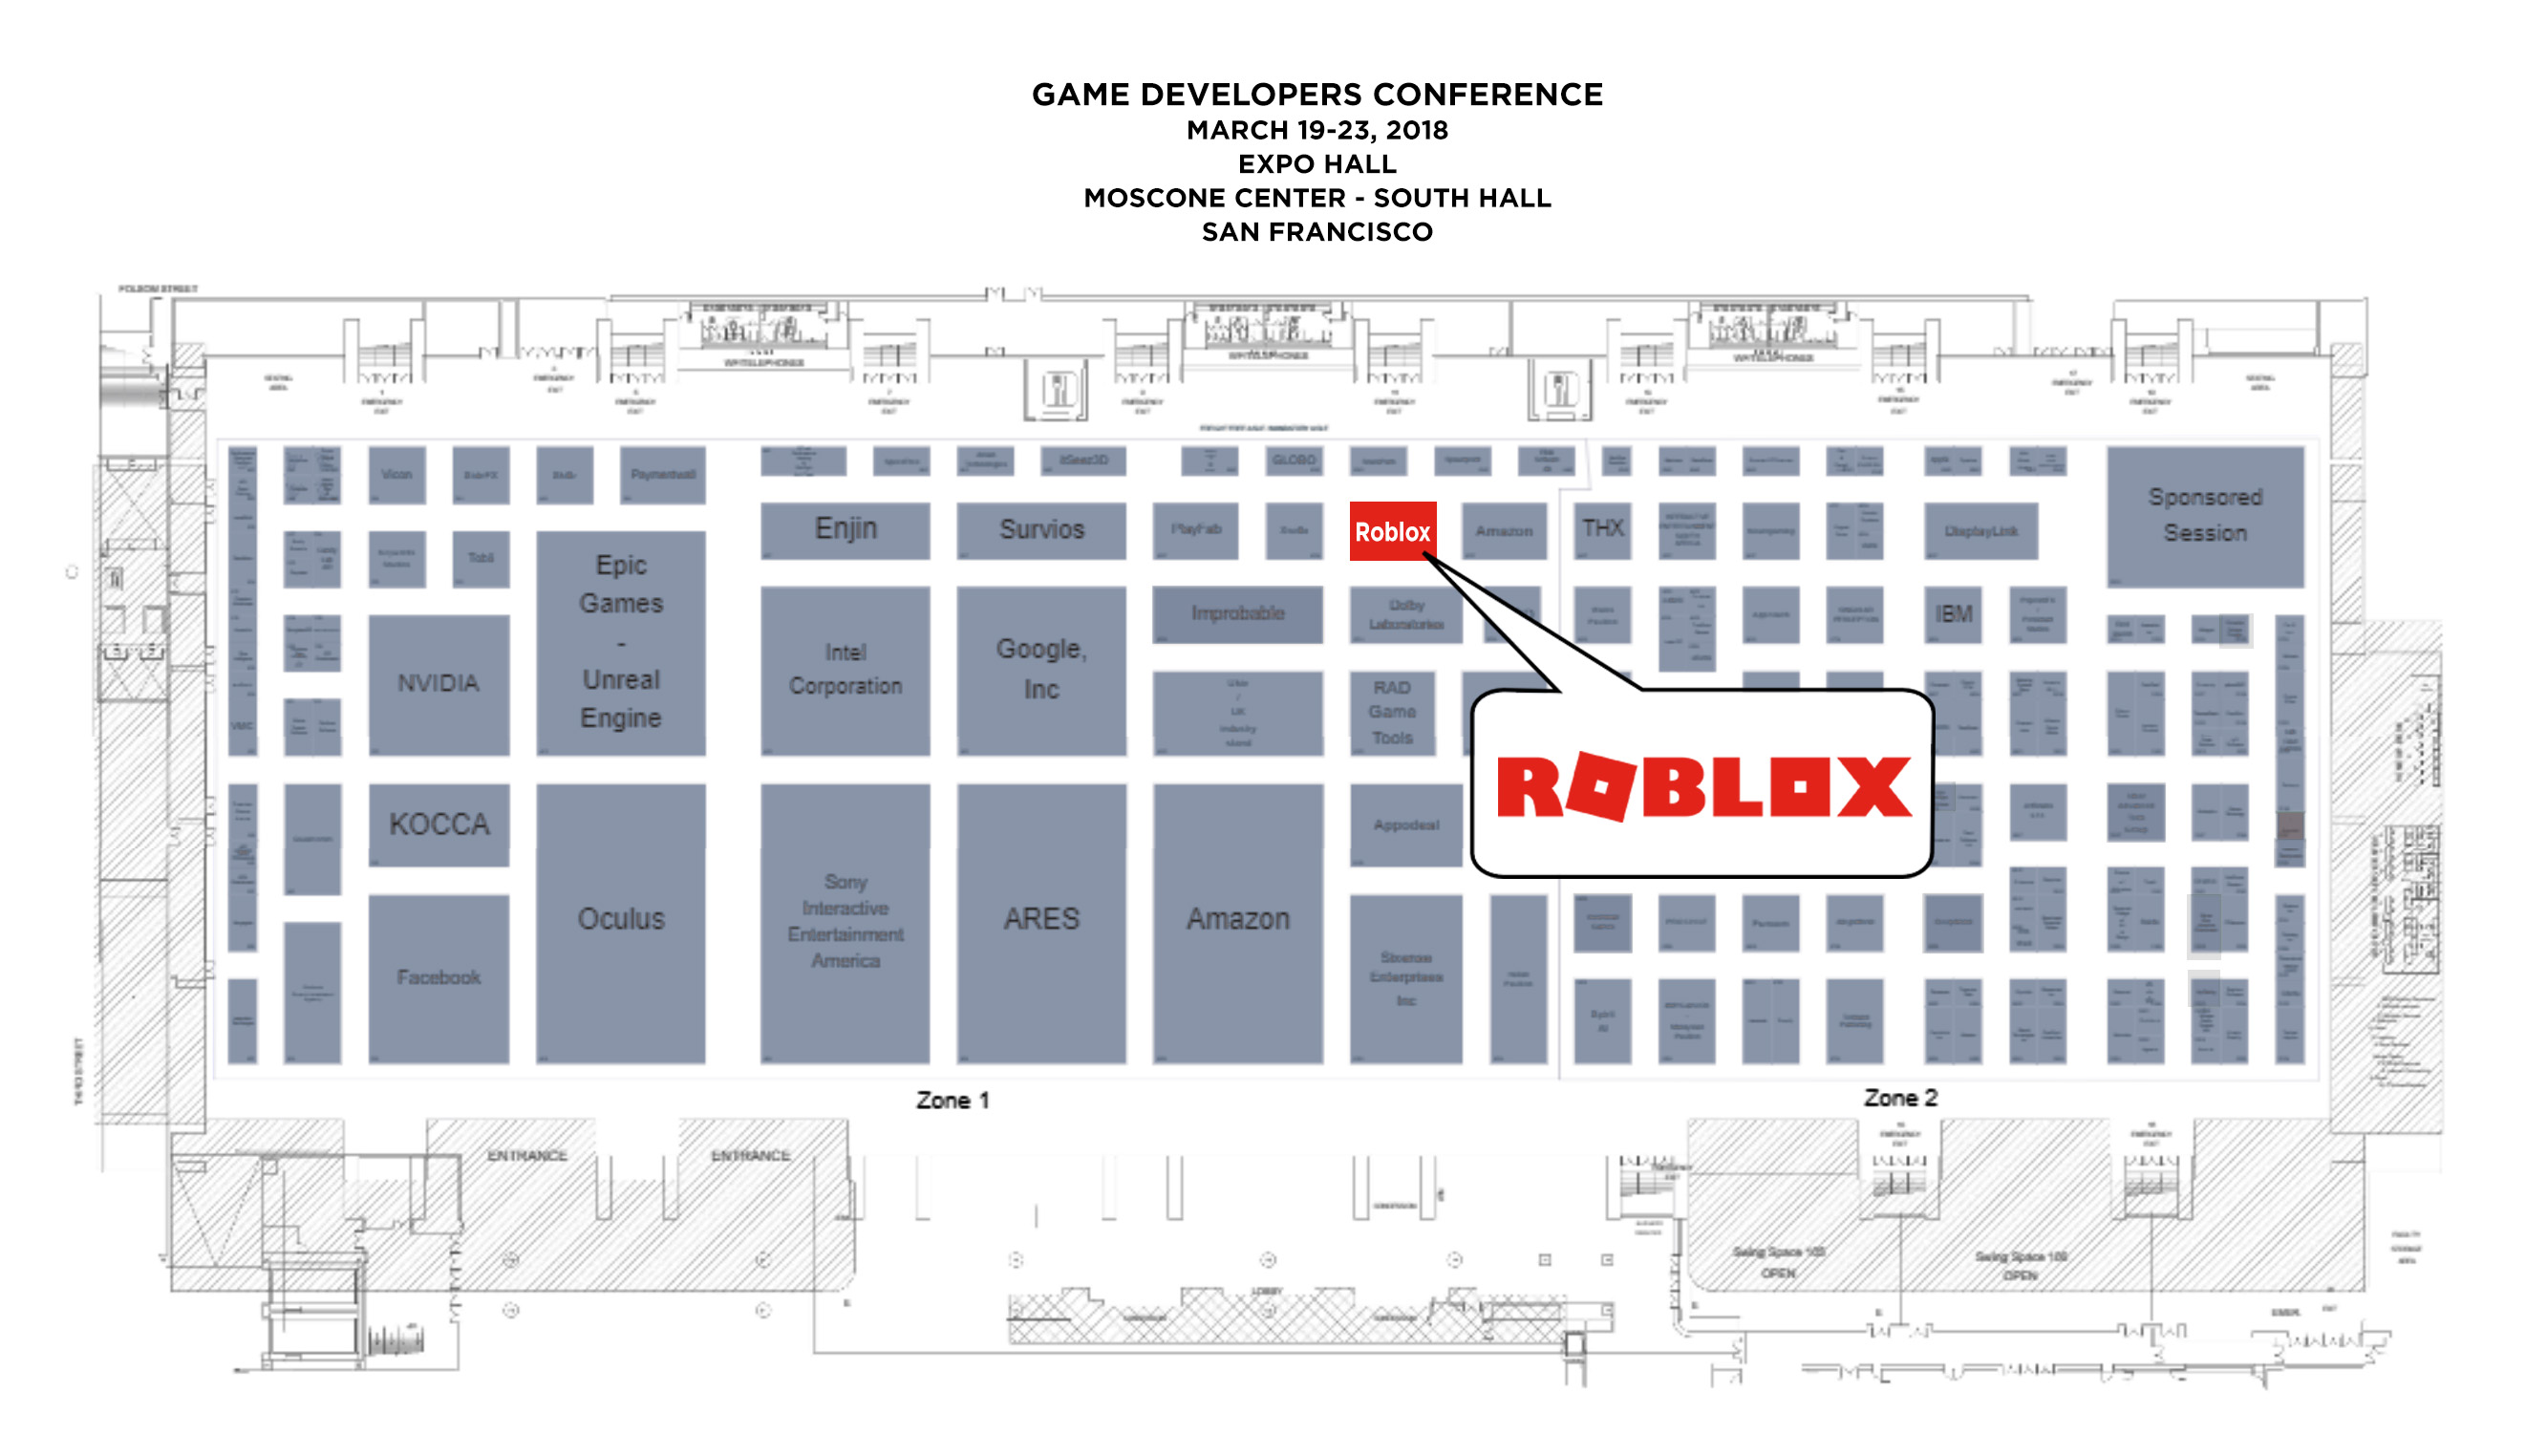 Connect With Roblox At Gdc 2018 Roblox Blog - roblox corp insideroblox twitter